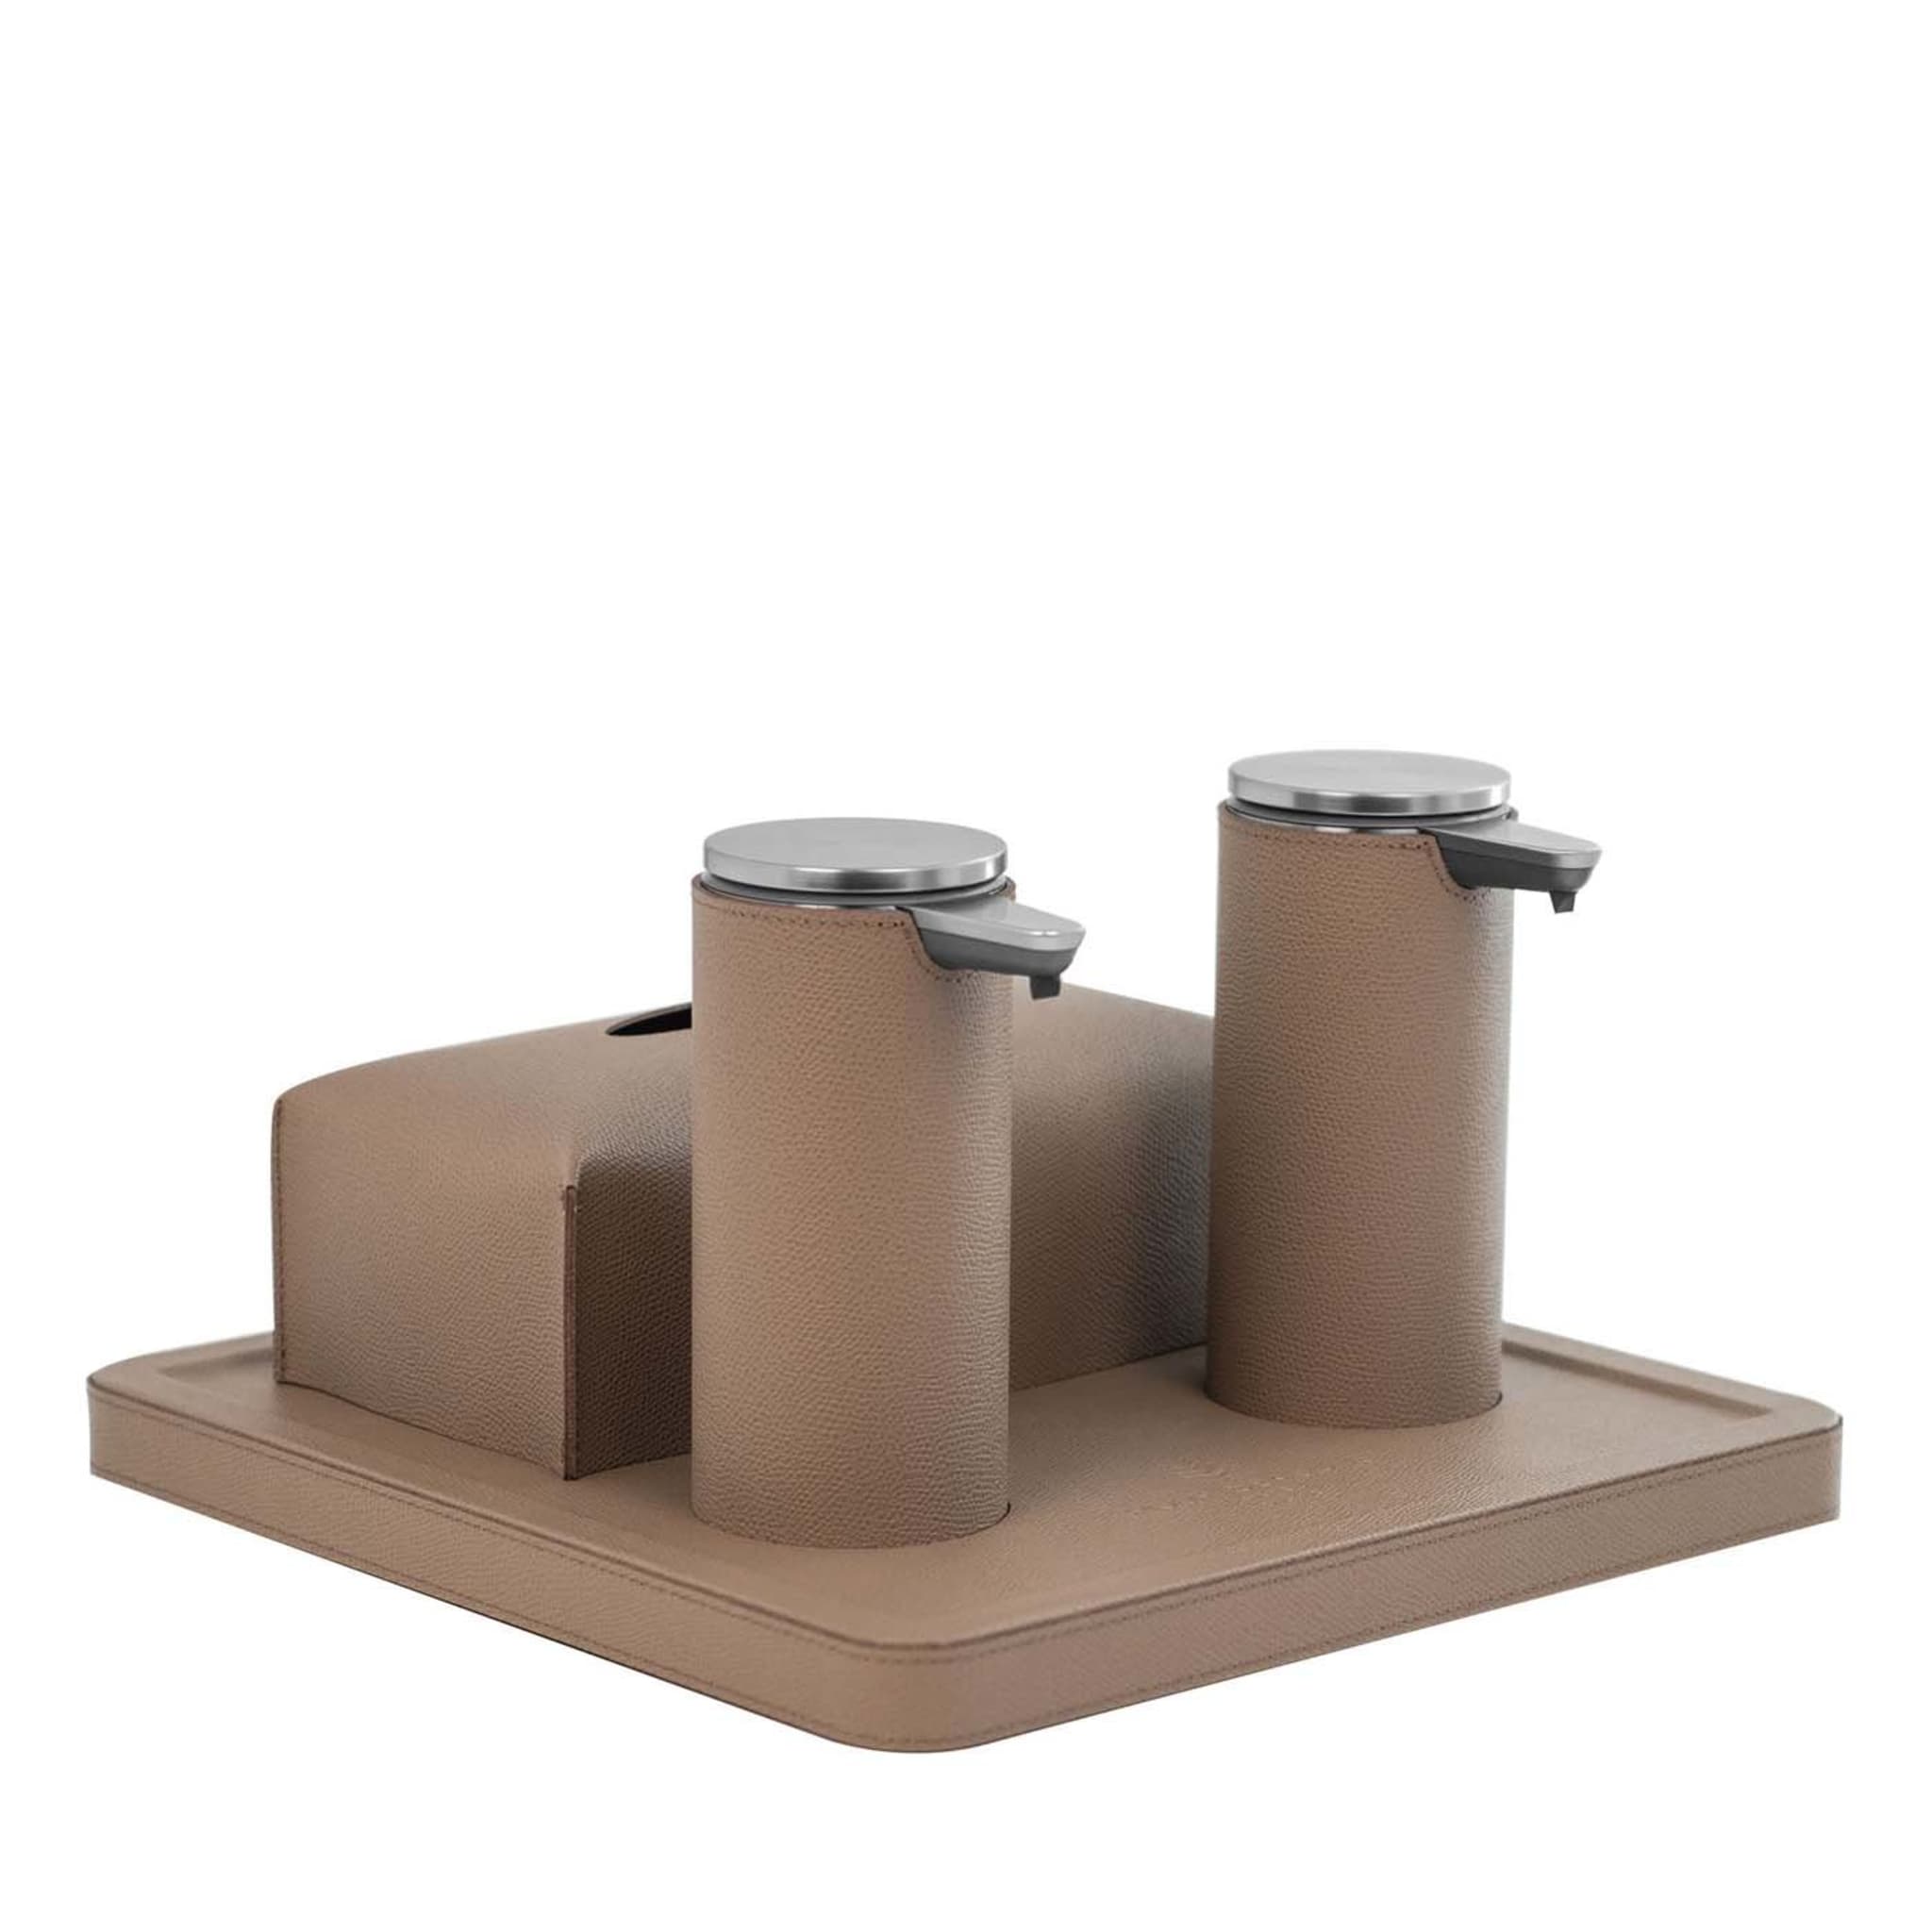 Igea Taupe Leather Tray with 2 Dispensers and Tissue Box Cover - Main view